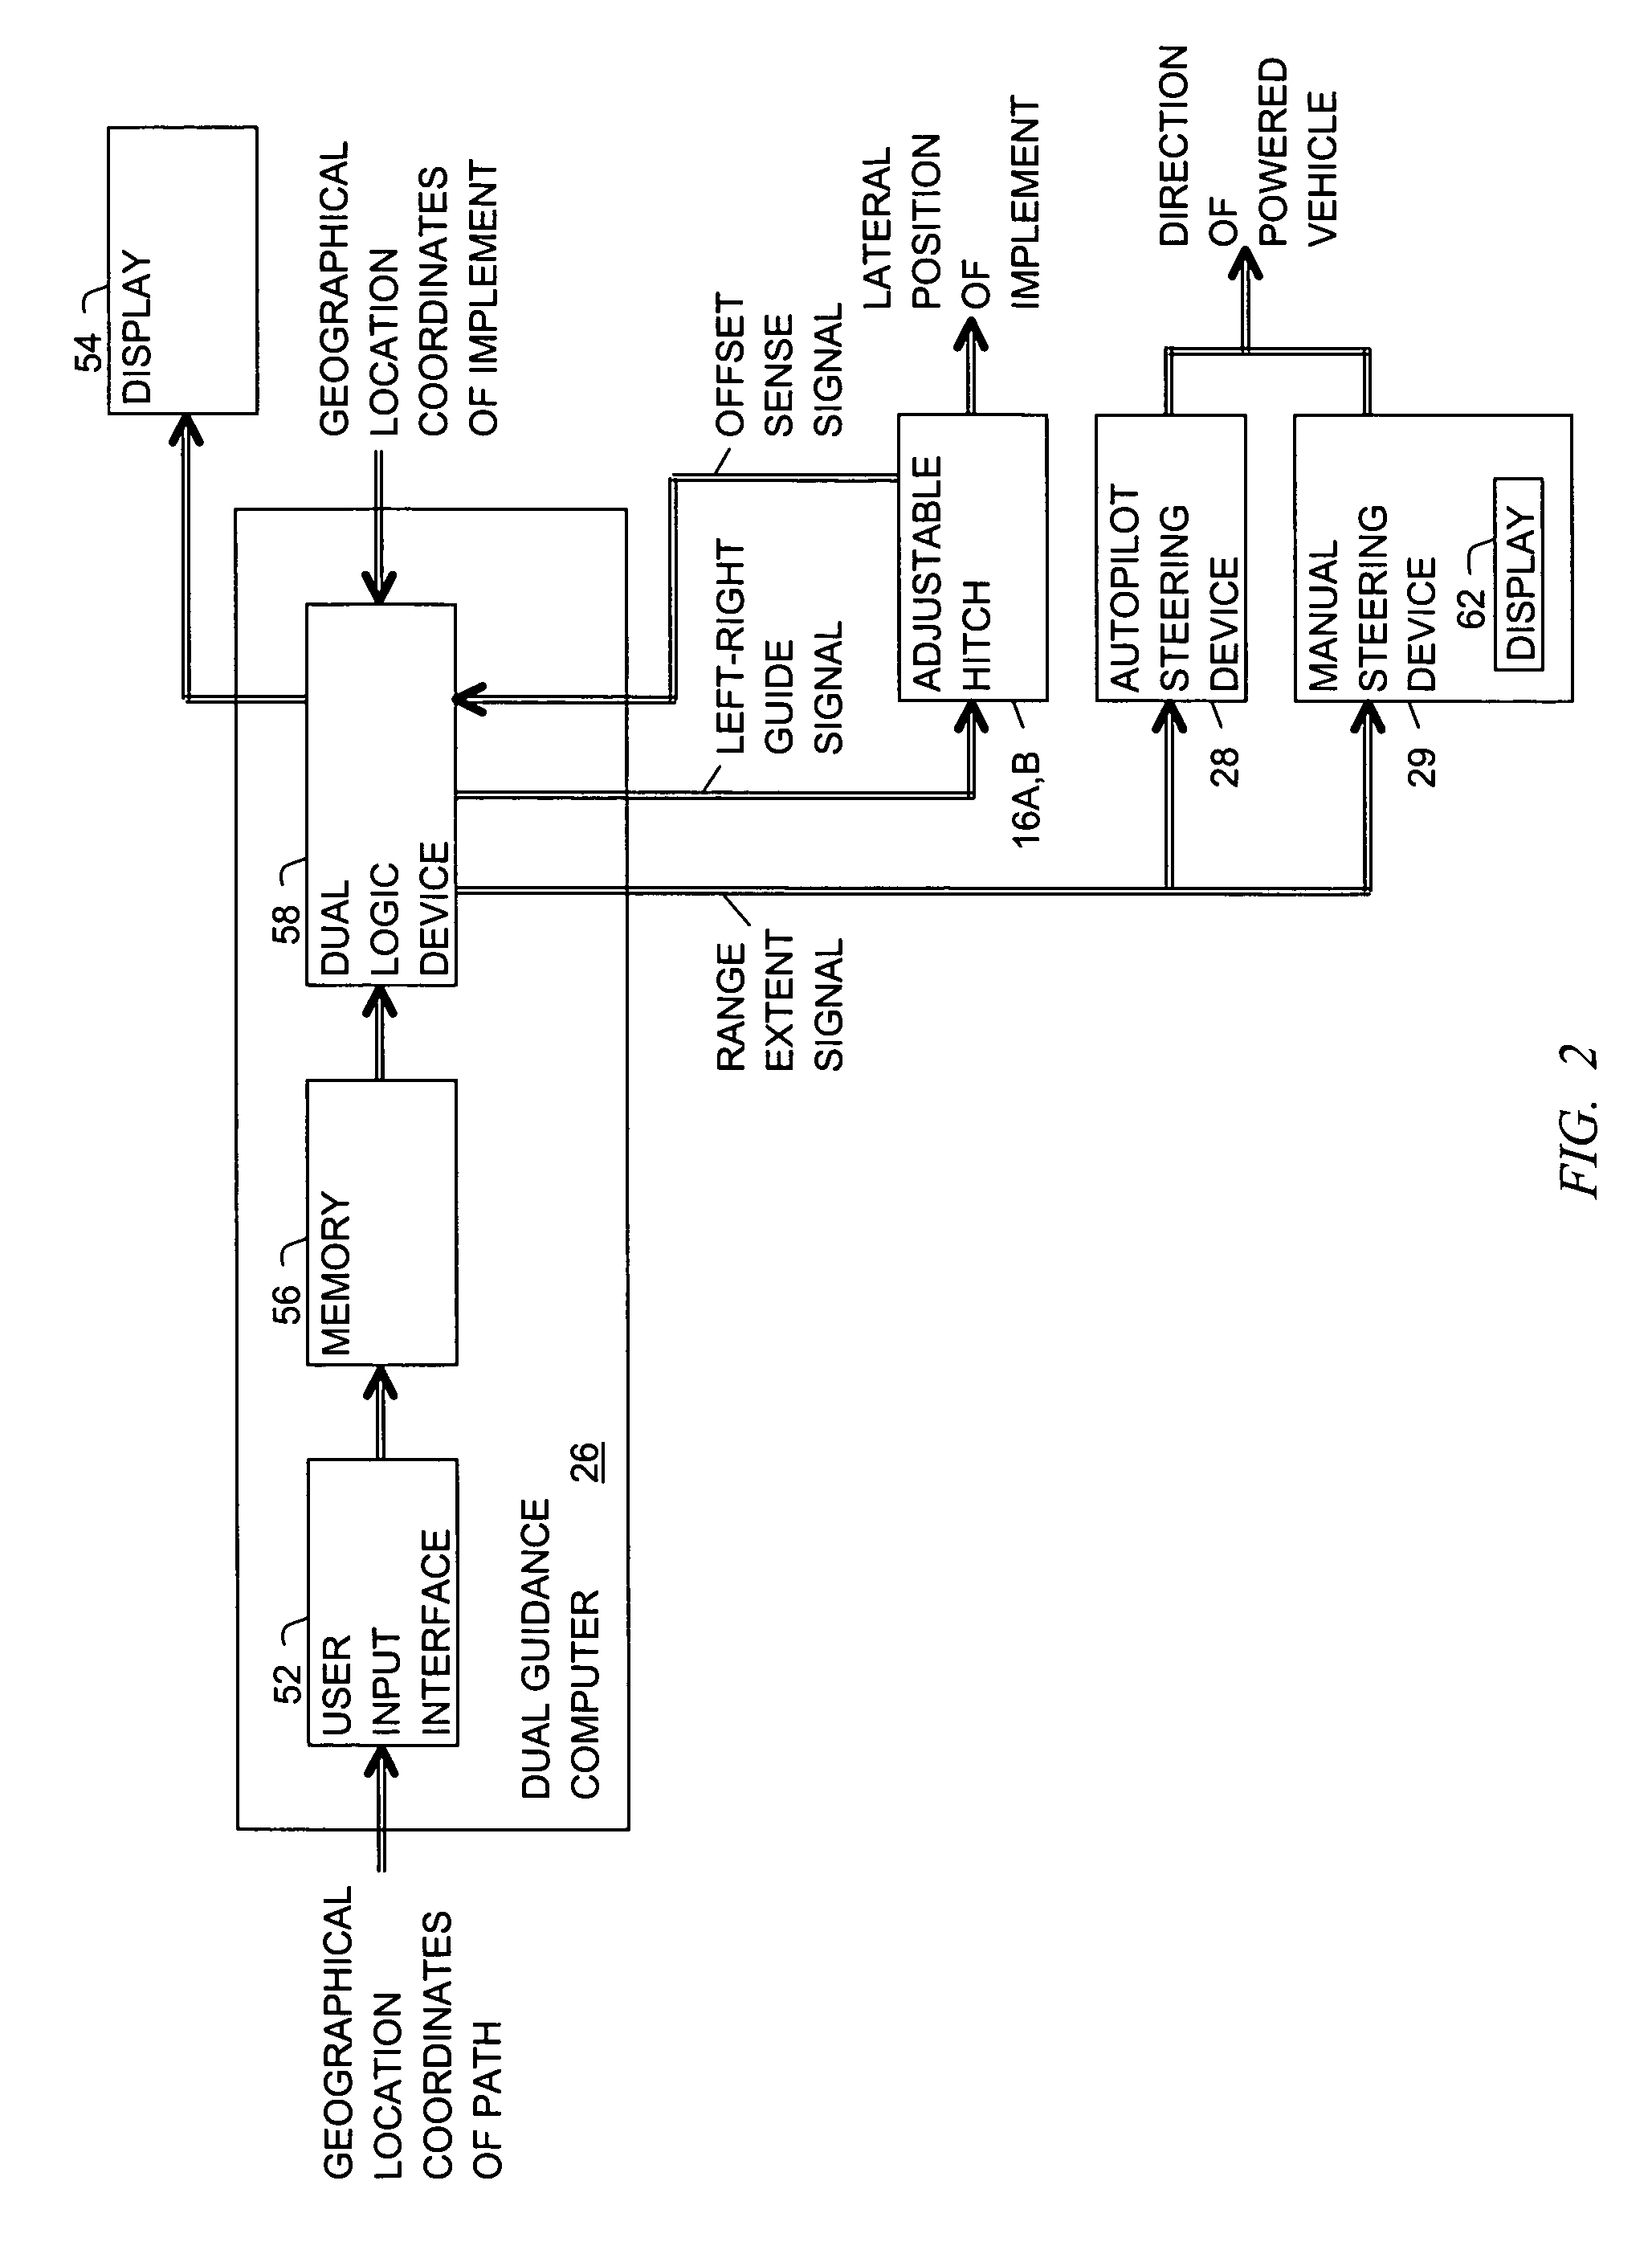 System for guiding a farm implement between swaths